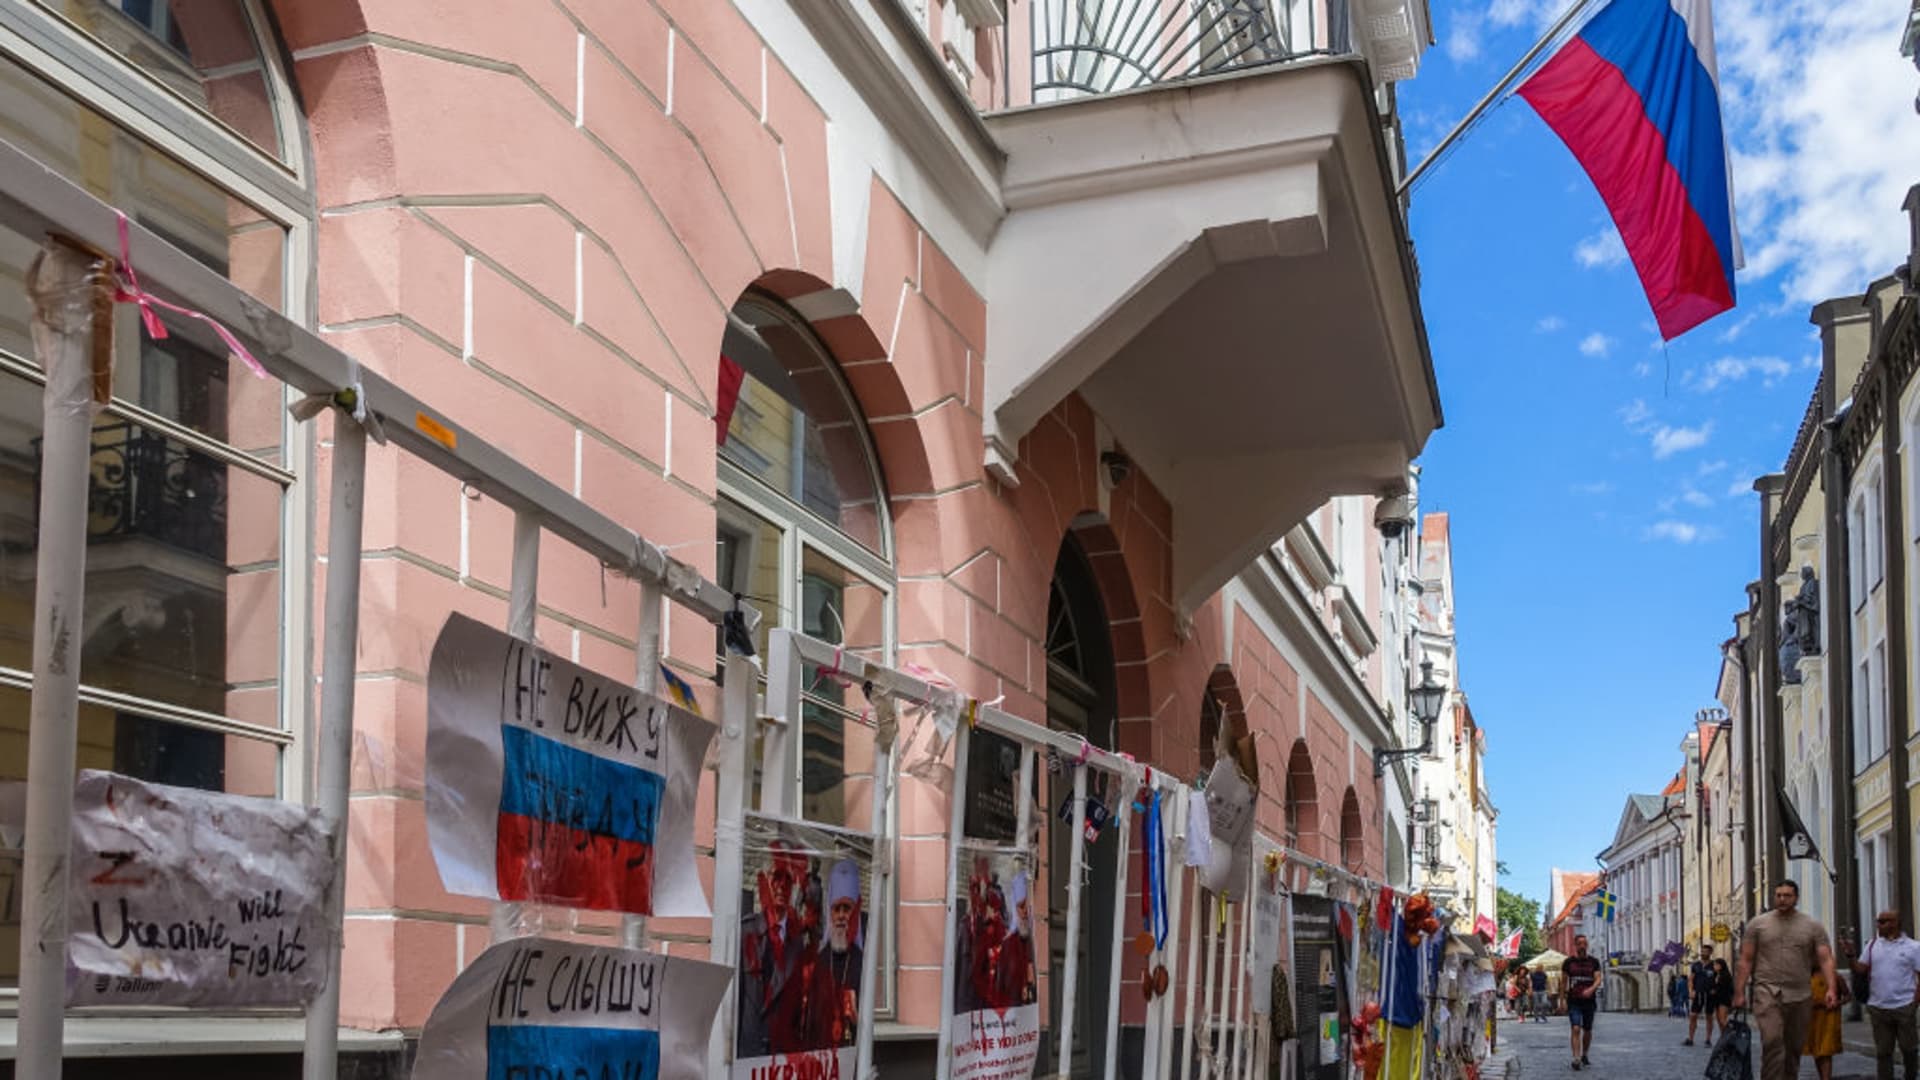 Anti-Russian banners hang on the fence in front of Russian embassy are seen in Tallinn, Estonia on 31 July 2022.